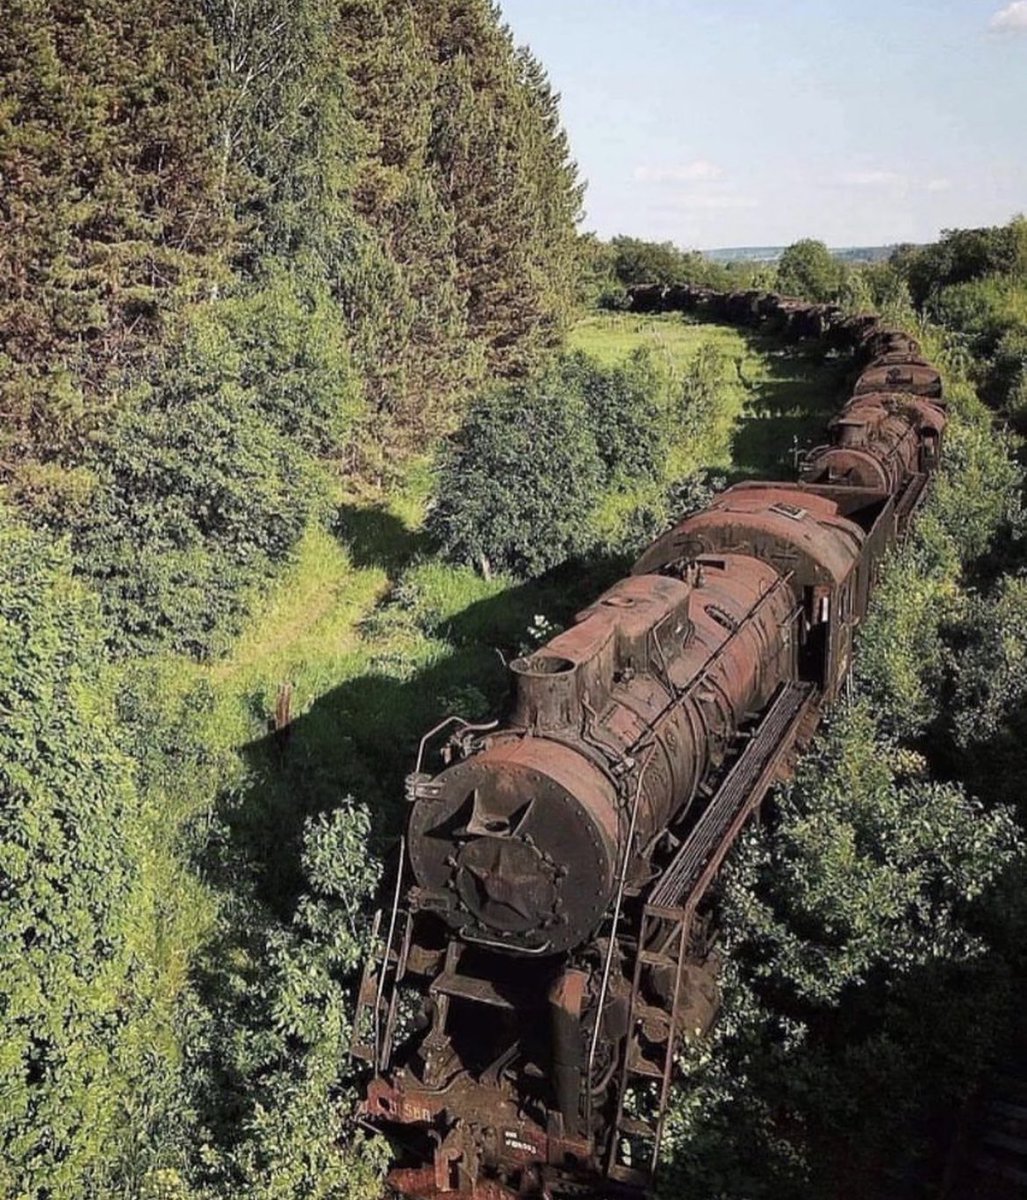 In Russia, during the Cold War, hundreds of old steam-engine trains were strategically parked on old tracks as a contingency plan in case the Russian electric grid faced any disruptions. The central Perm region of Russia is home to a unique sight - a train cemetery filled with